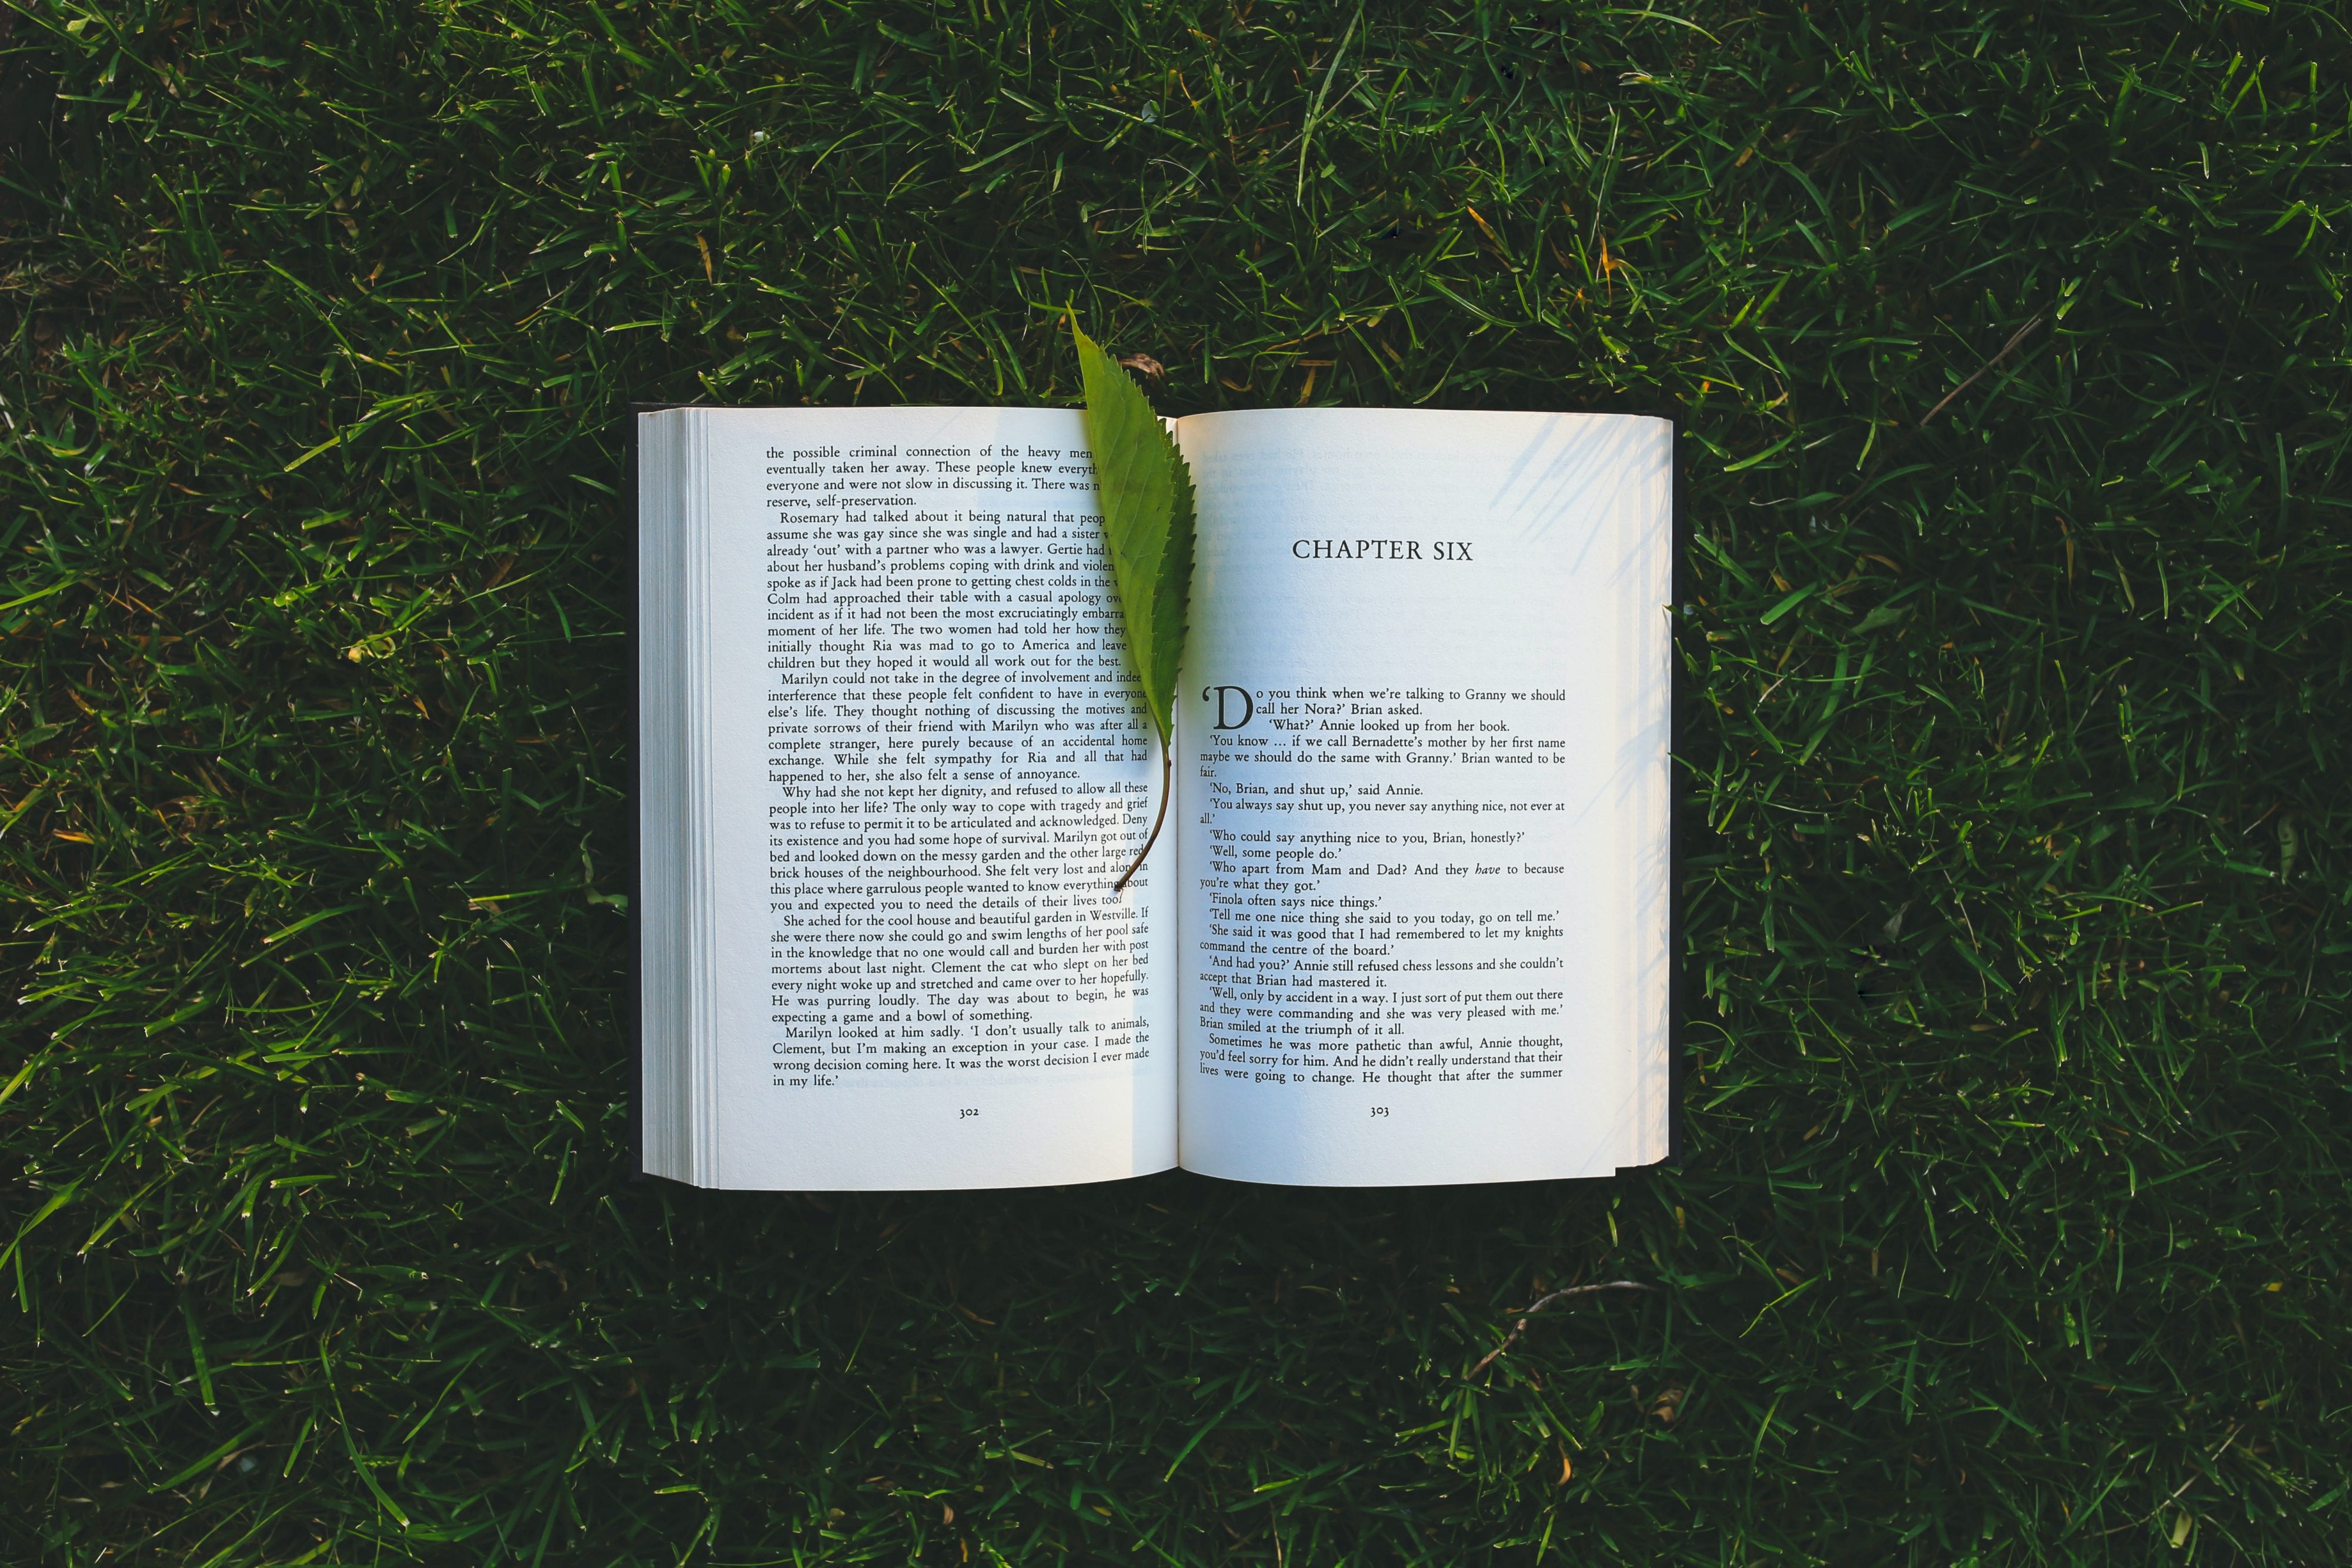 An open book laying in grass